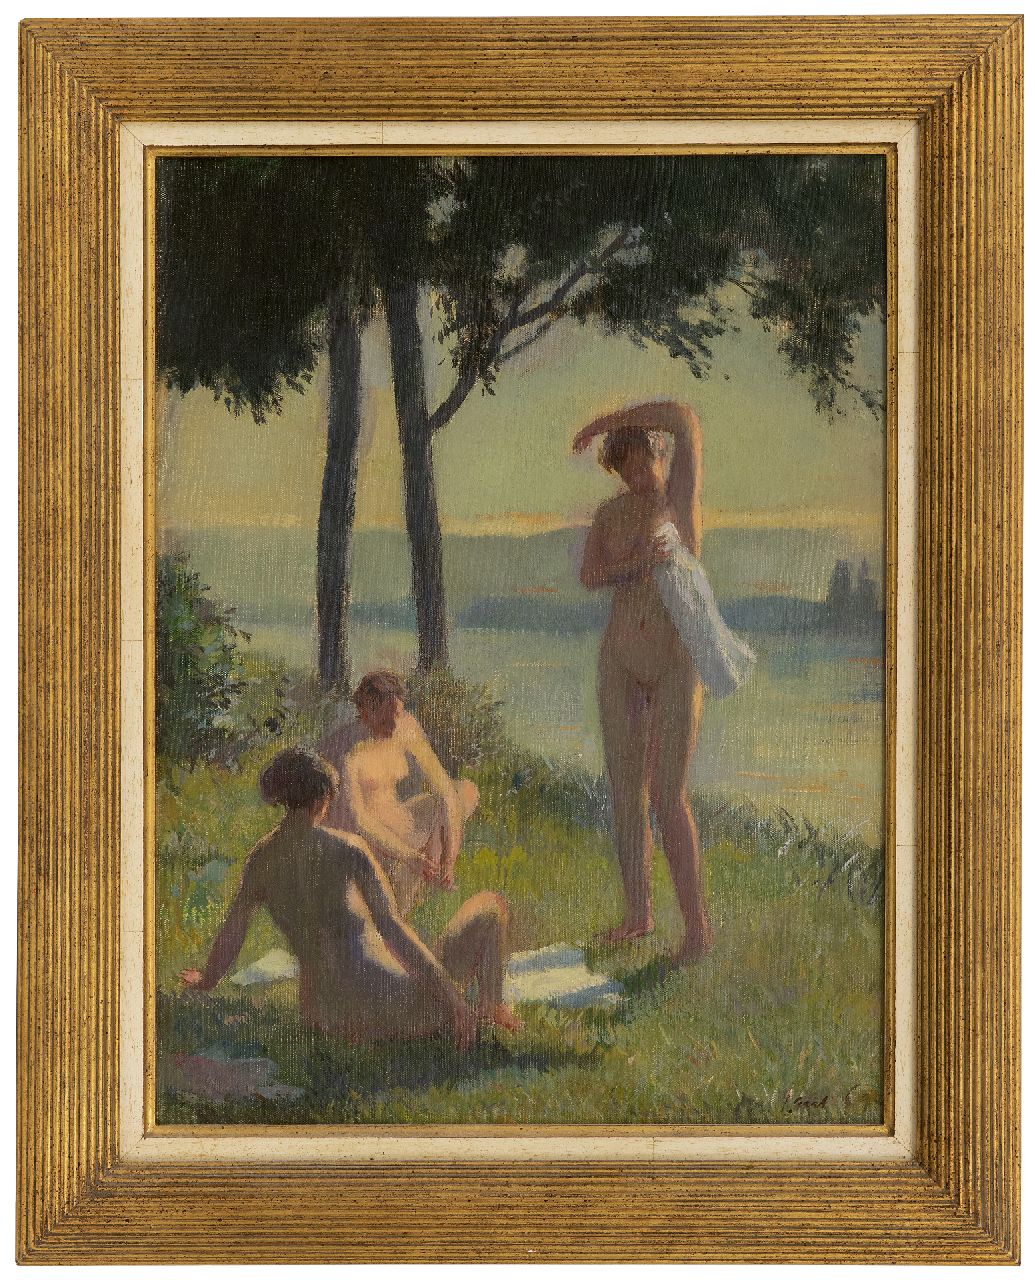 Garf S.  | Salomon Garf | Paintings offered for sale | Women bathing, oil on canvas 39.4 x 29.9 cm, signed l.r.